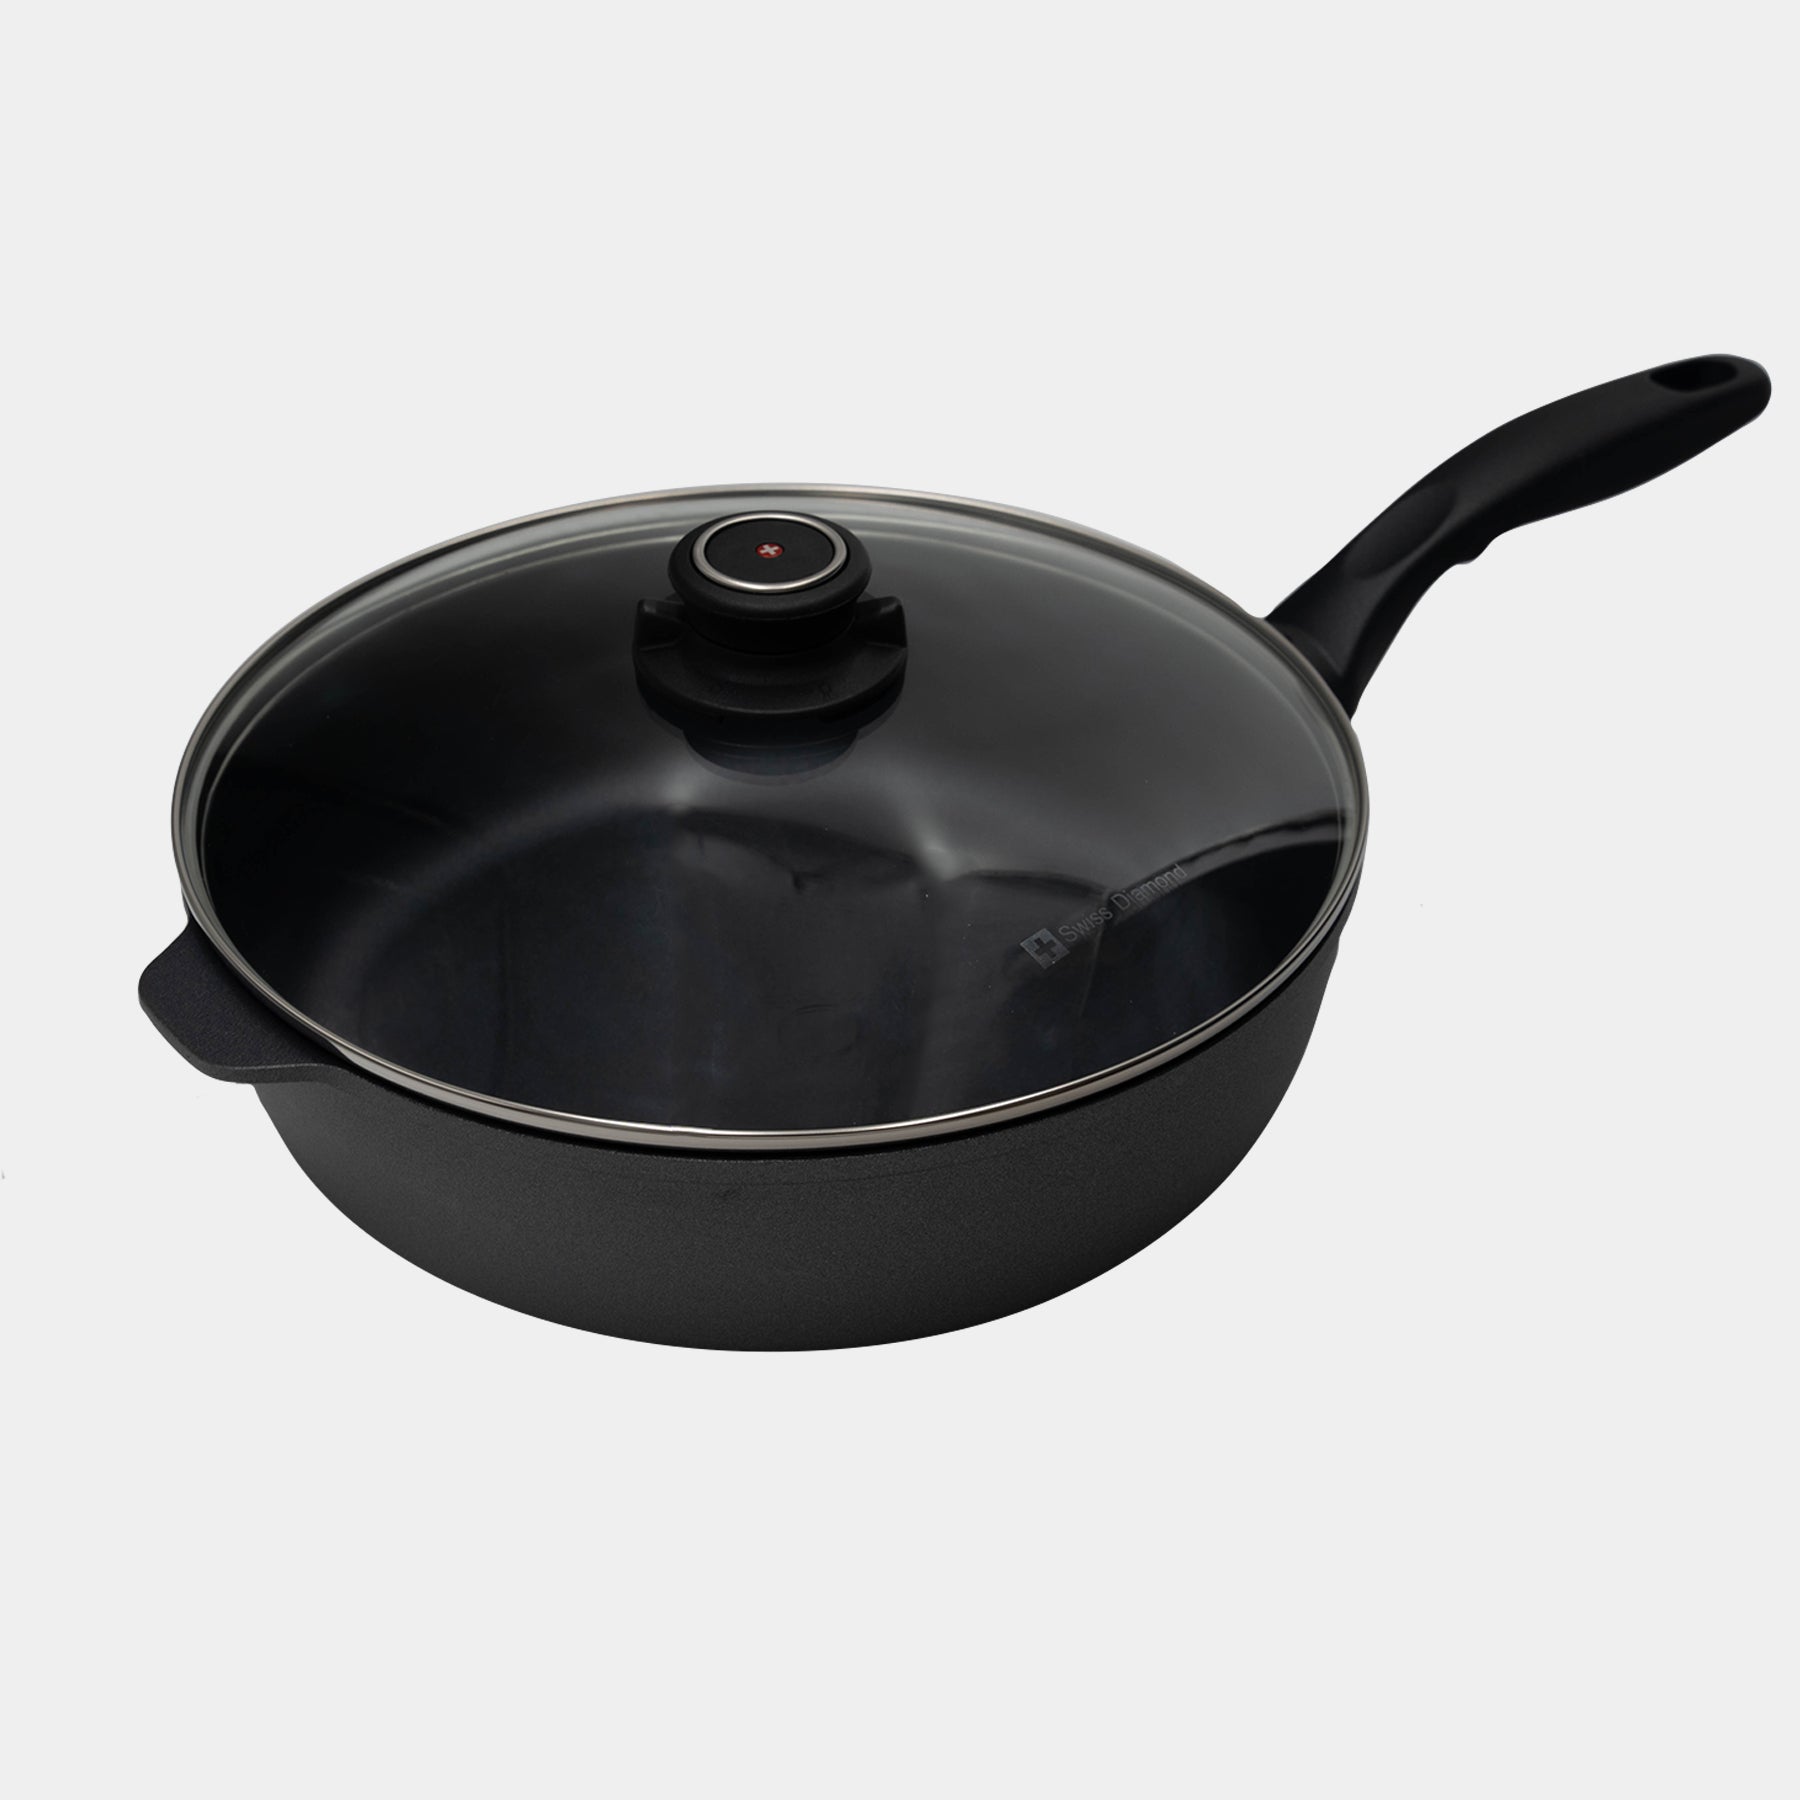 HD Nonstick 4.3 qt Saute Pan with Glass Lid - Induction